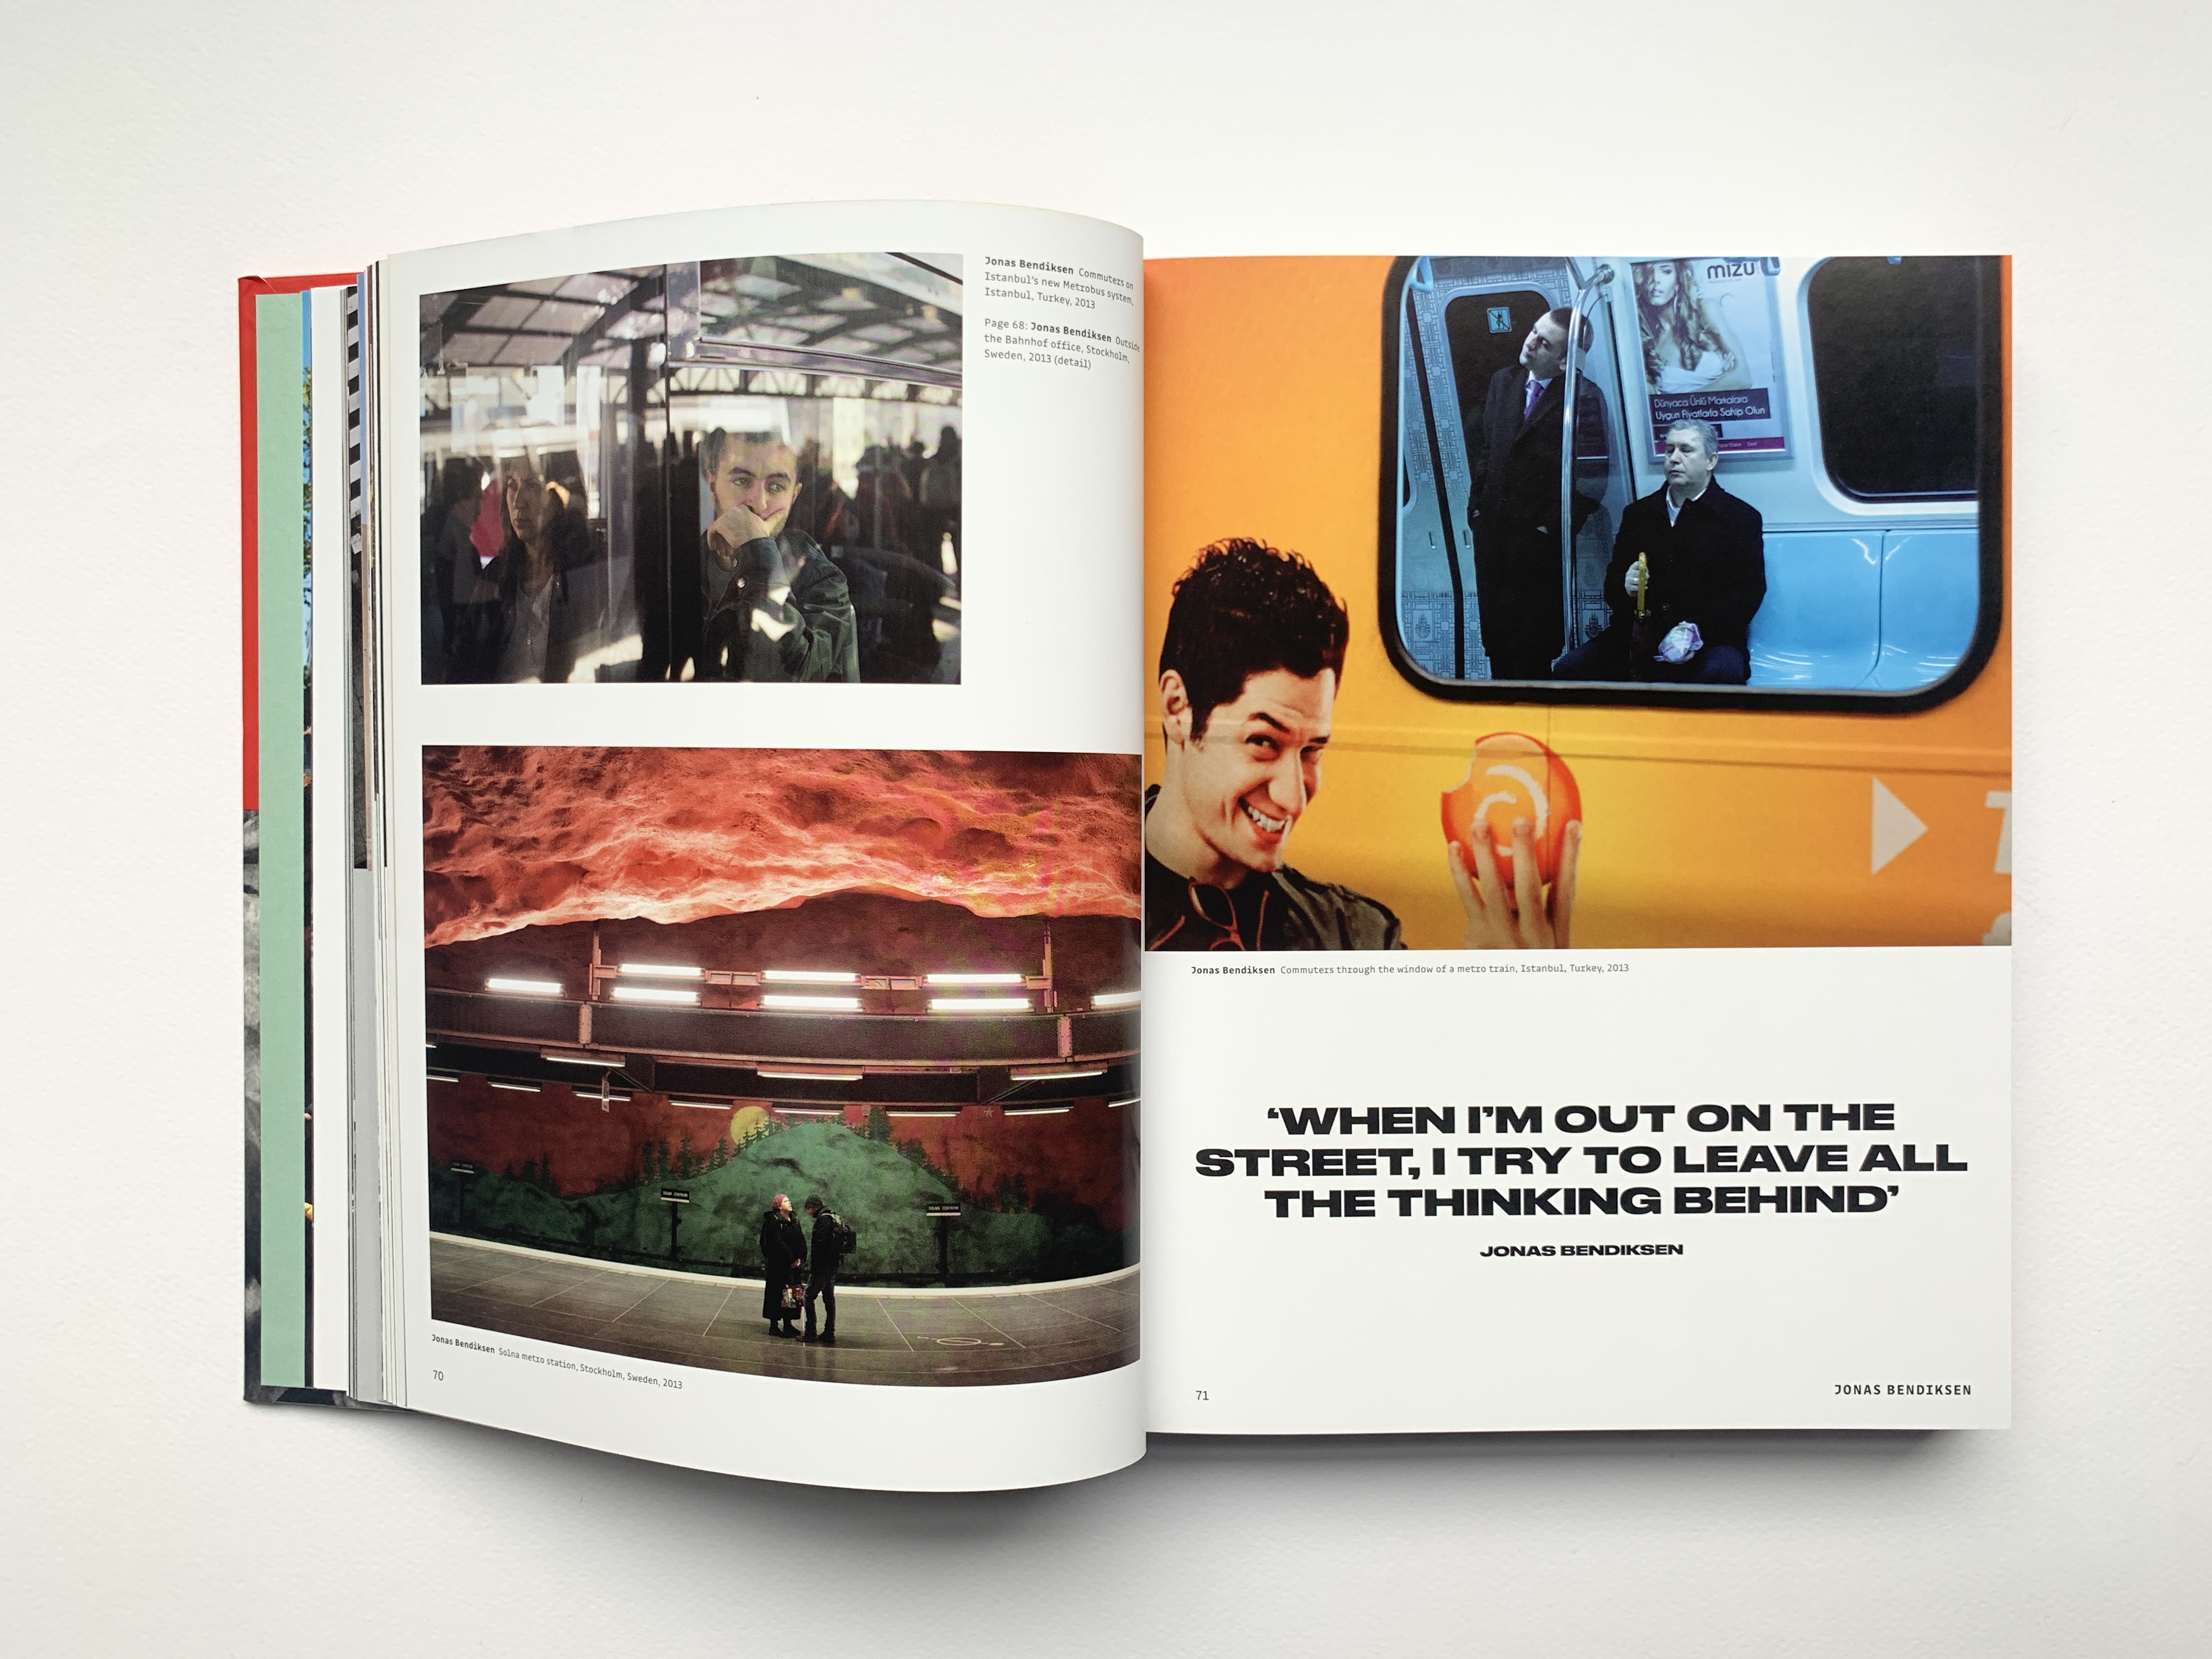 By Stephen McLaren from Magnum Streetwise: The Ultimate Collection of Street Photography copyright Thames & Hudson 2019 